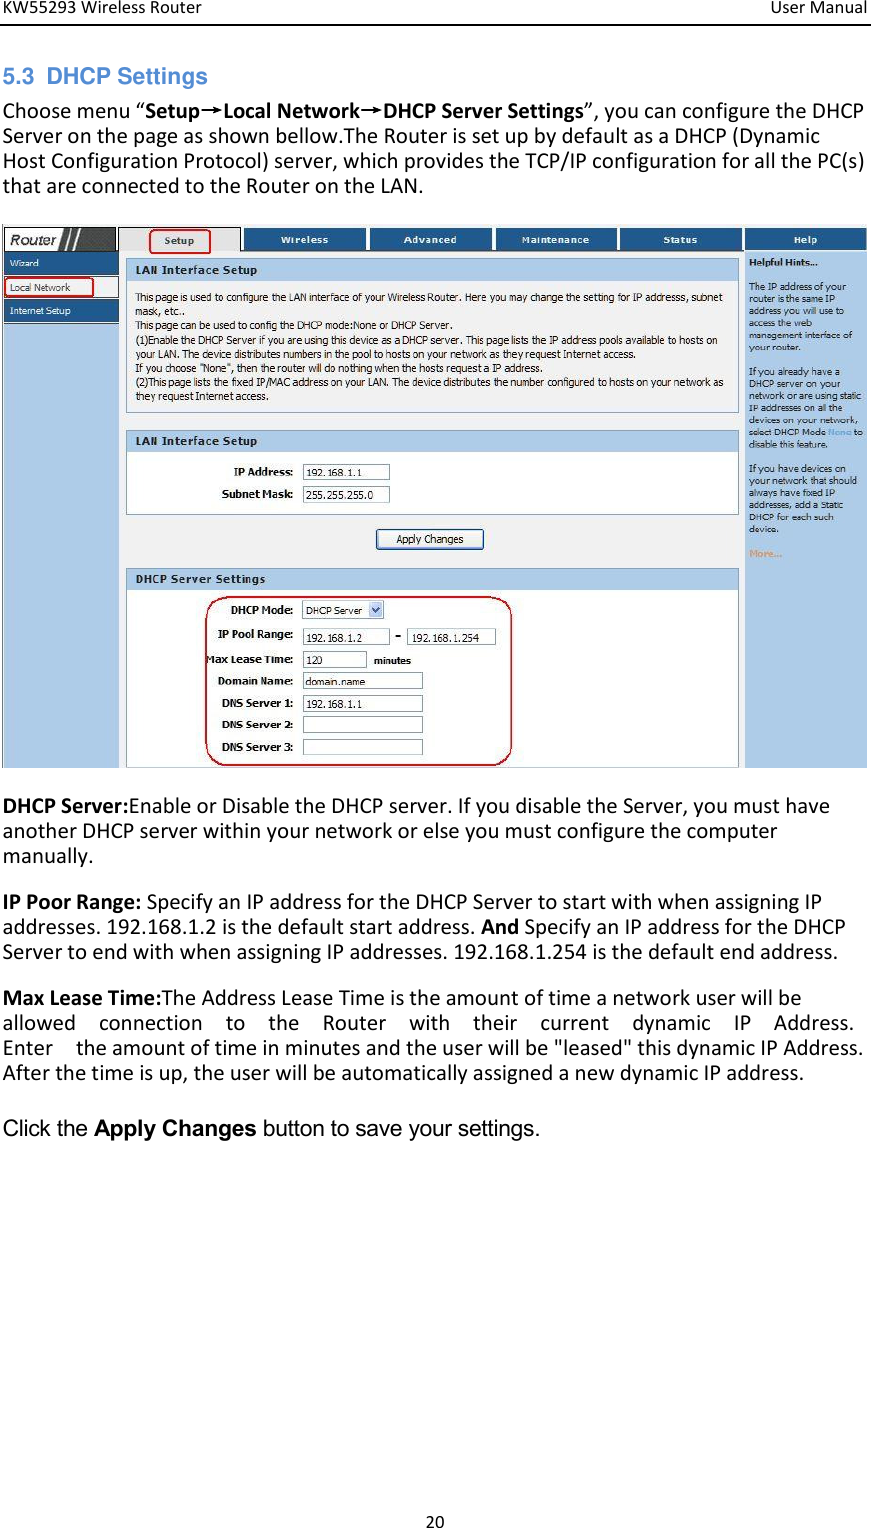 KW55293 Wireless Router         User Manual 20 5.3  DHCP Settings Choose eu Setup→Local Network→DHCP Server Settings, you a ofigure the DHCP Server on the page as shown bellow.The Router is set up by default as a DHCP (Dynamic Host Configuration Protocol) server, which provides the TCP/IP configuration for all the PC(s) that are connected to the Router on the LAN.    DHCP Server:Enable or Disable the DHCP server. If you disable the Server, you must have another DHCP server within your network or else you must configure the computer manually.     IP Poor Range: Specify an IP address for the DHCP Server to start with when assigning IP addresses. 192.168.1.2 is the default start address. And Specify an IP address for the DHCP Server to end with when assigning IP addresses. 192.168.1.254 is the default end address.     Max Lease Time:The Address Lease Time is the amount of time a network user will be   allowed    connection    to    the    Router    with    their    current    dynamic    IP    Address.   Enter    the amount of time in minutes and the user will be &quot;leased&quot; this dynamic IP Address. After the time is up, the user will be automatically assigned a new dynamic IP address.   Click the Apply Changes button to save your settings.             